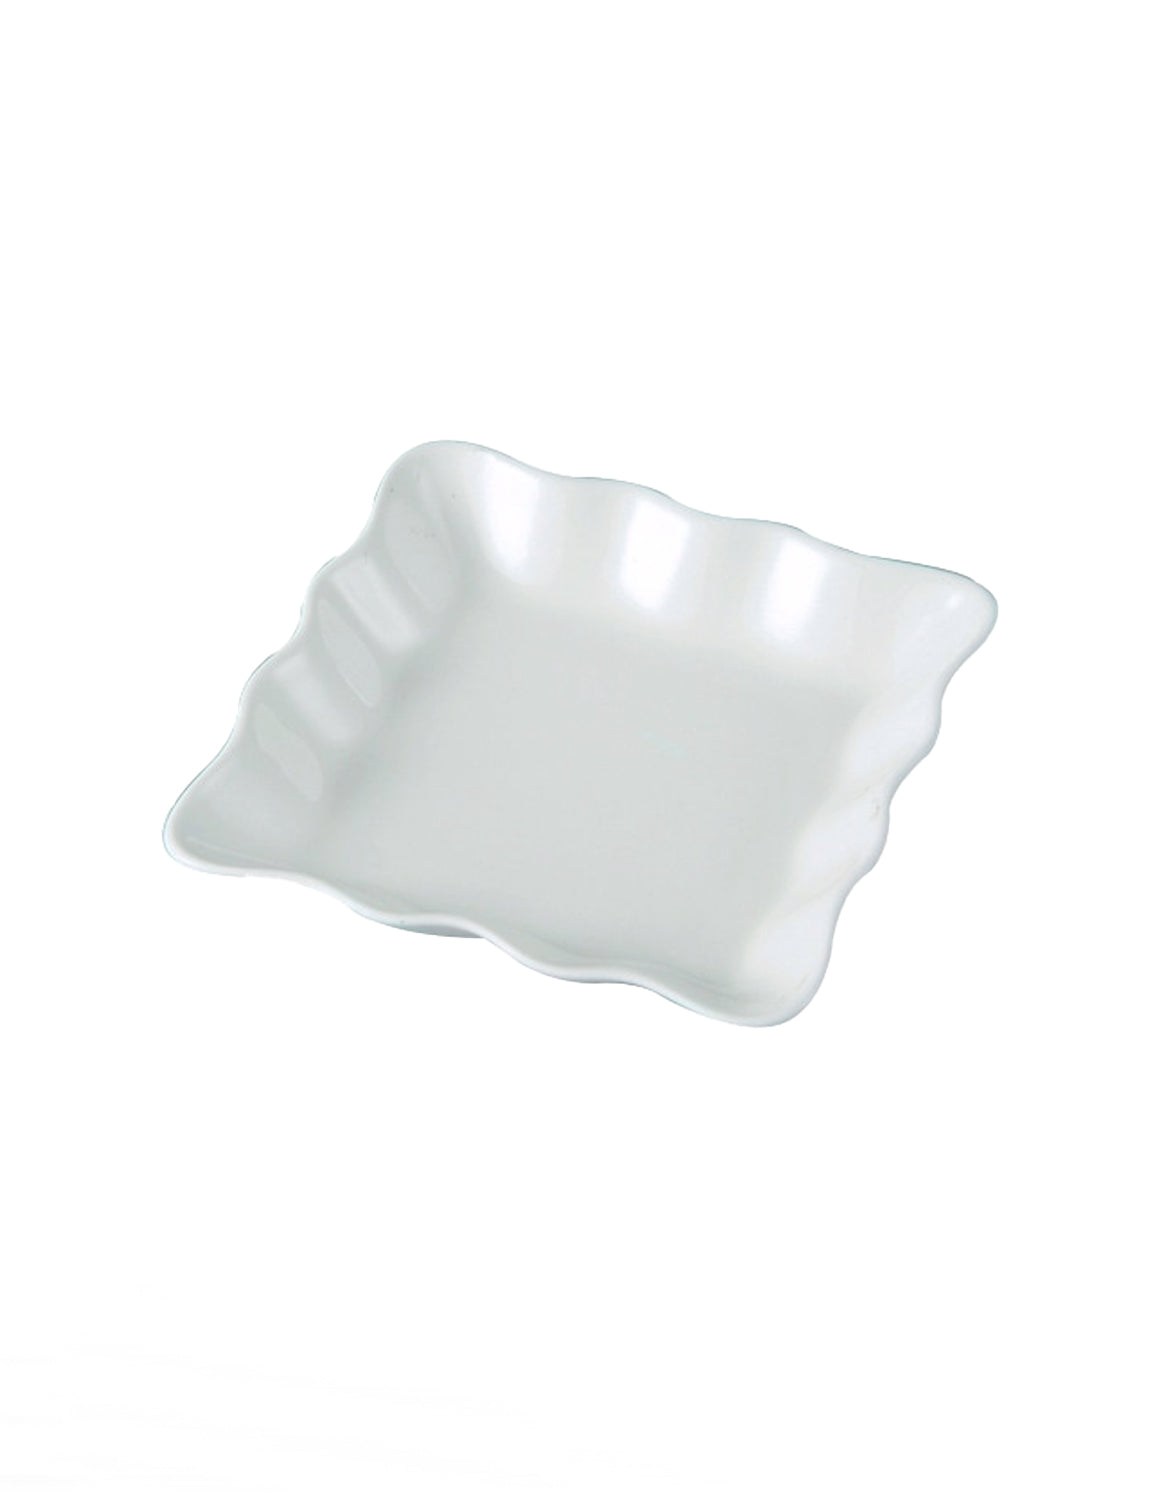 Twig White Serving Lace Square Plate, medium